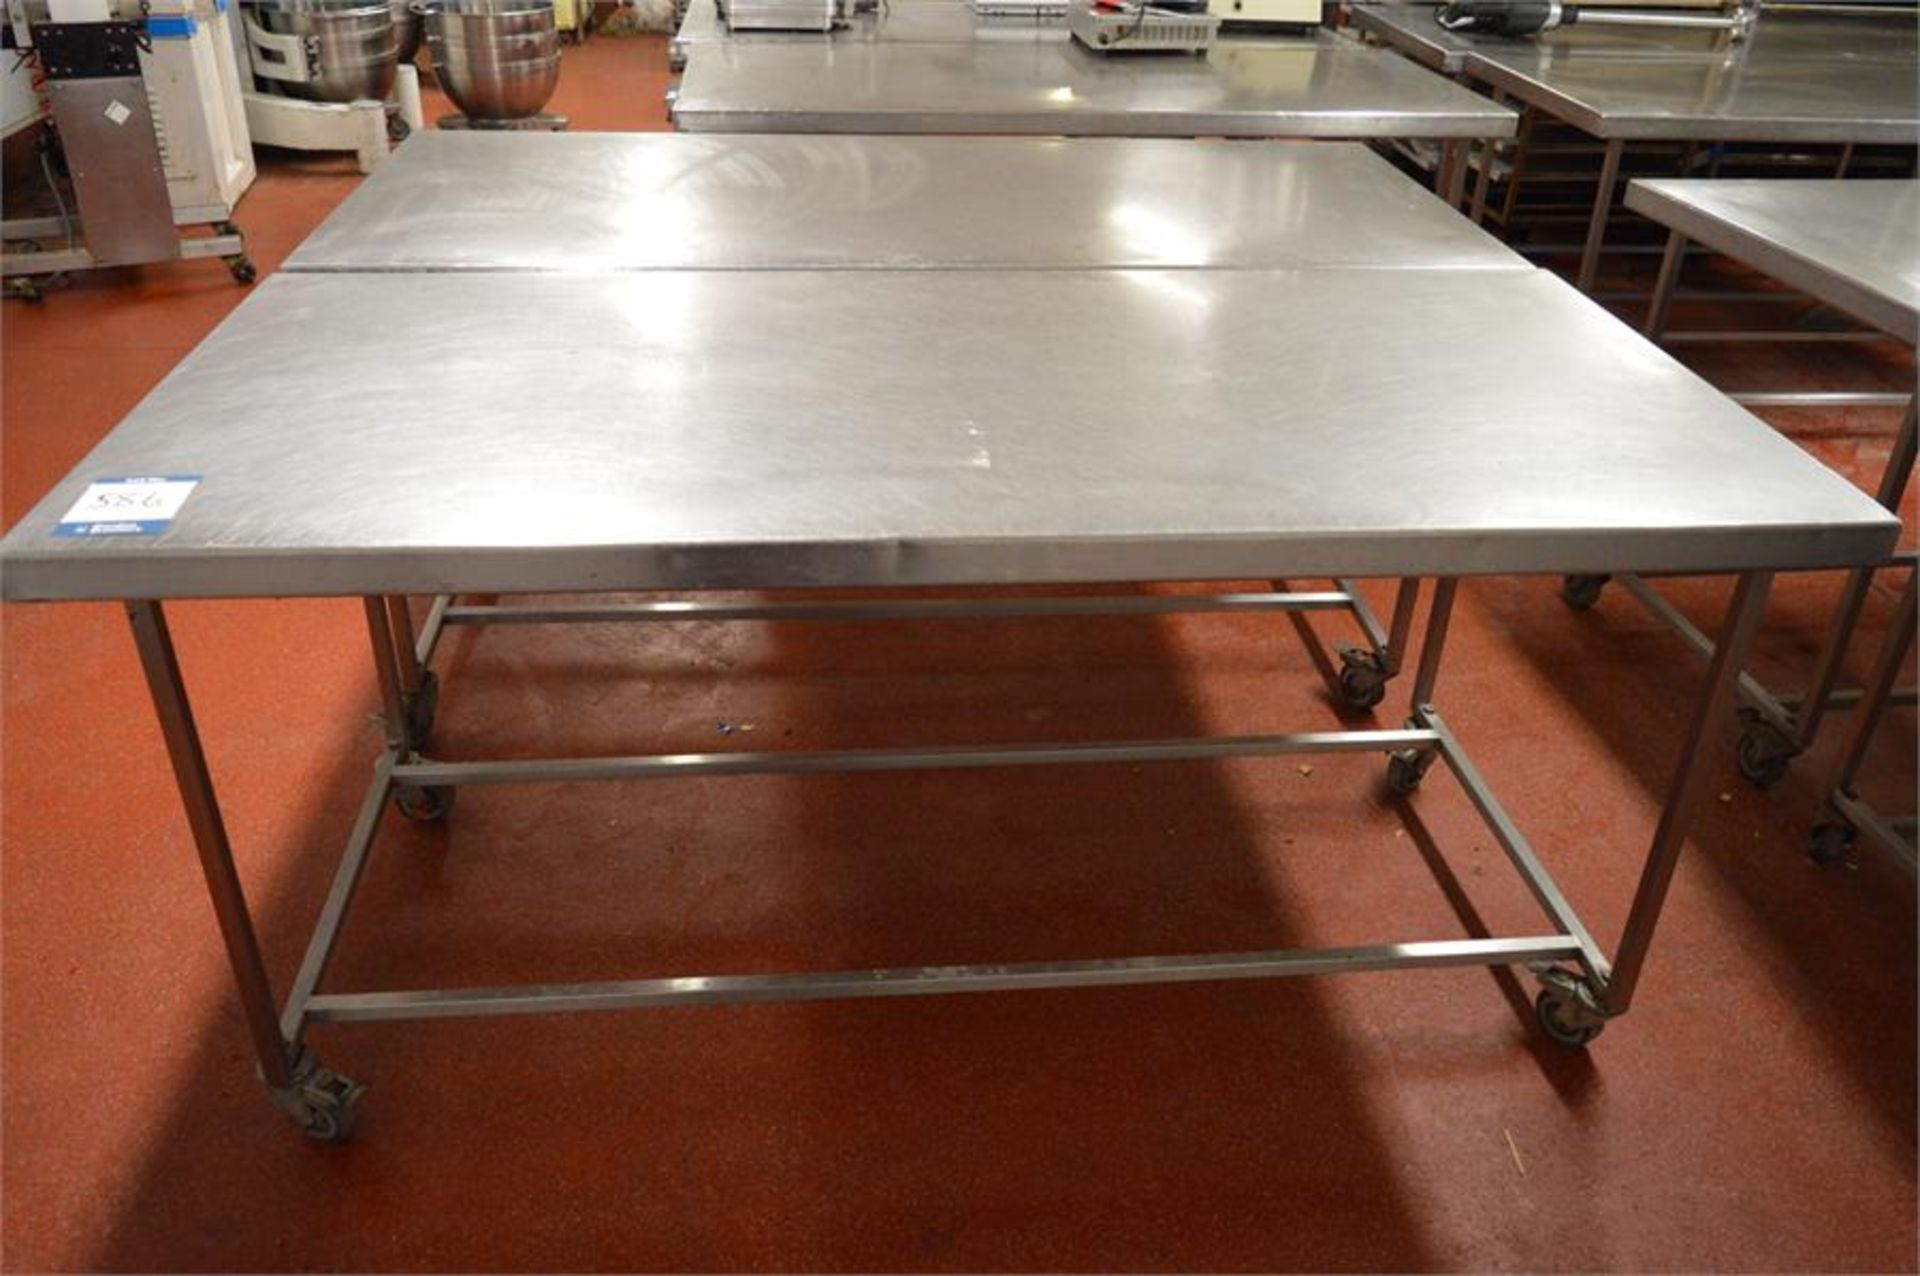 2 x stainless steel mobile prep tables, 1.87m (w) x 0.87m (d) x 0.88m (h) (Located at Continental